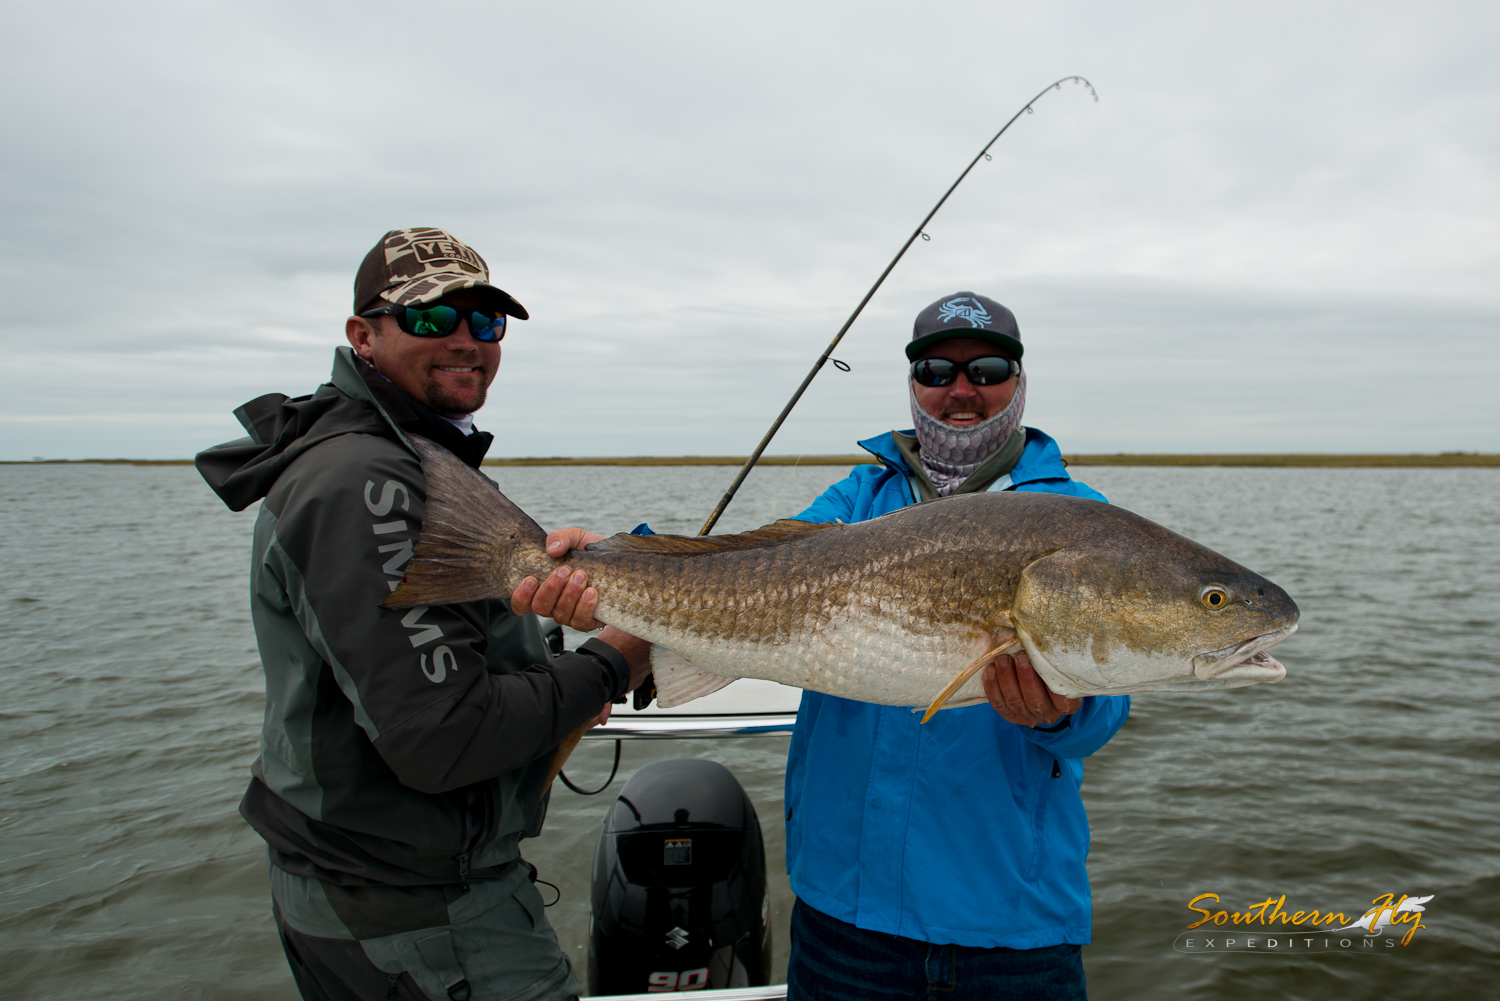 2018-11-19-21_SouthernFlyExpeditions_NewOrleans_JuddJacksonMikeO'Dell-13.jpg